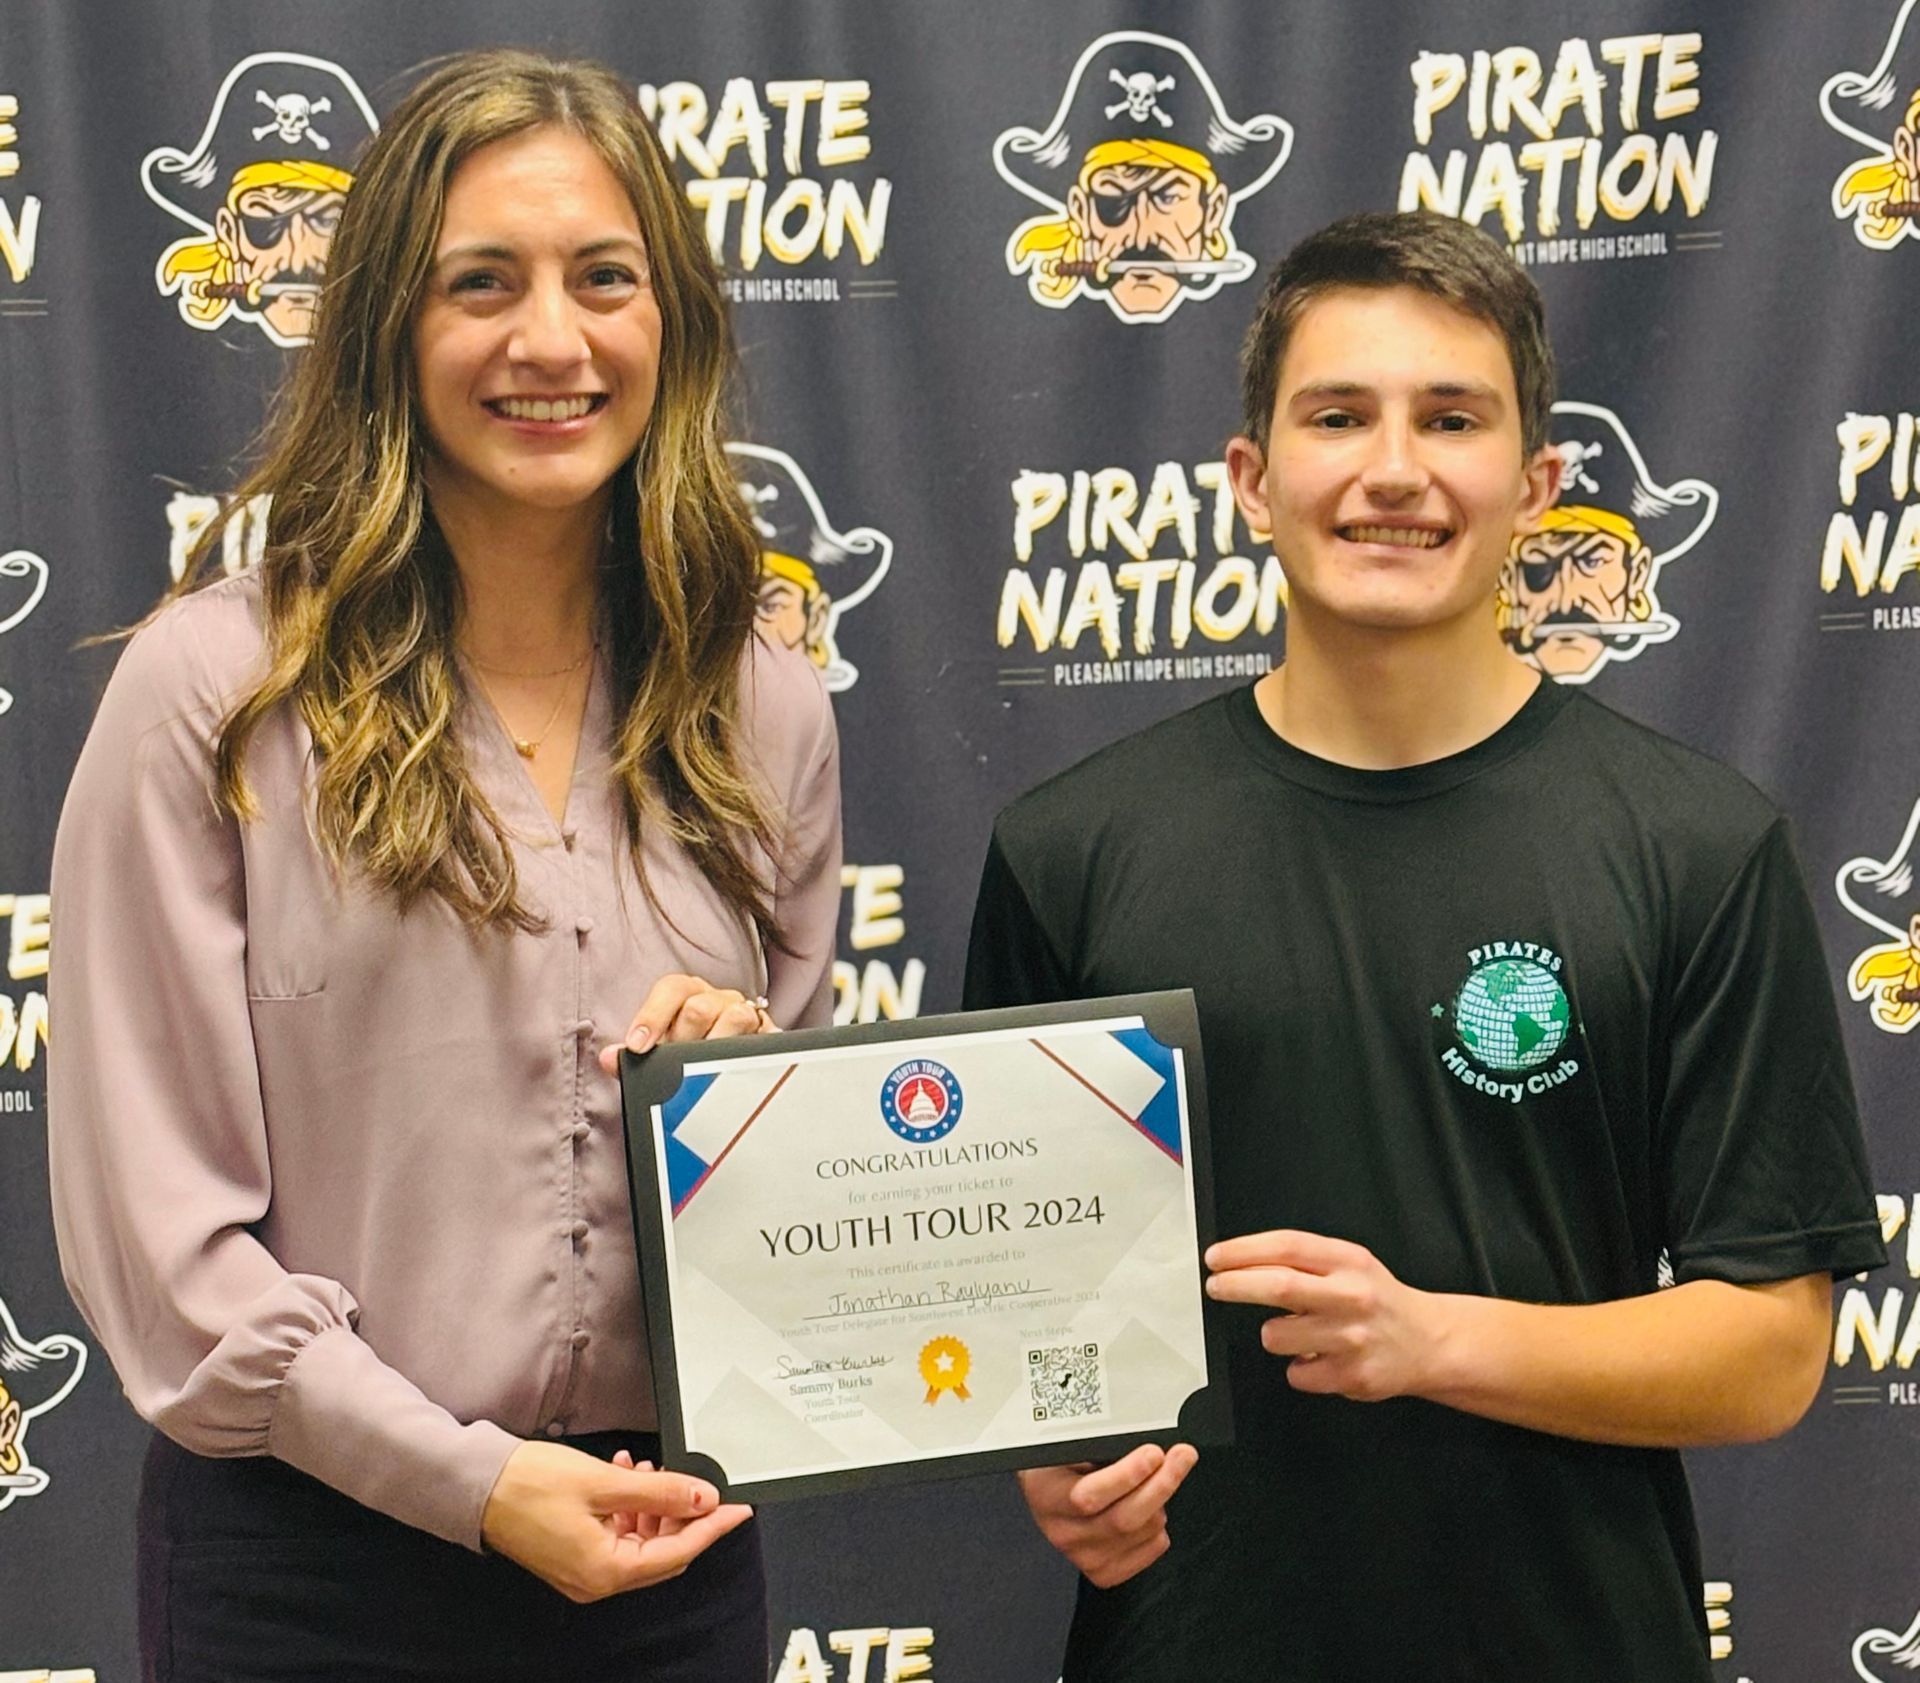 A man and a woman are holding a certificate in front of a pirate nation background